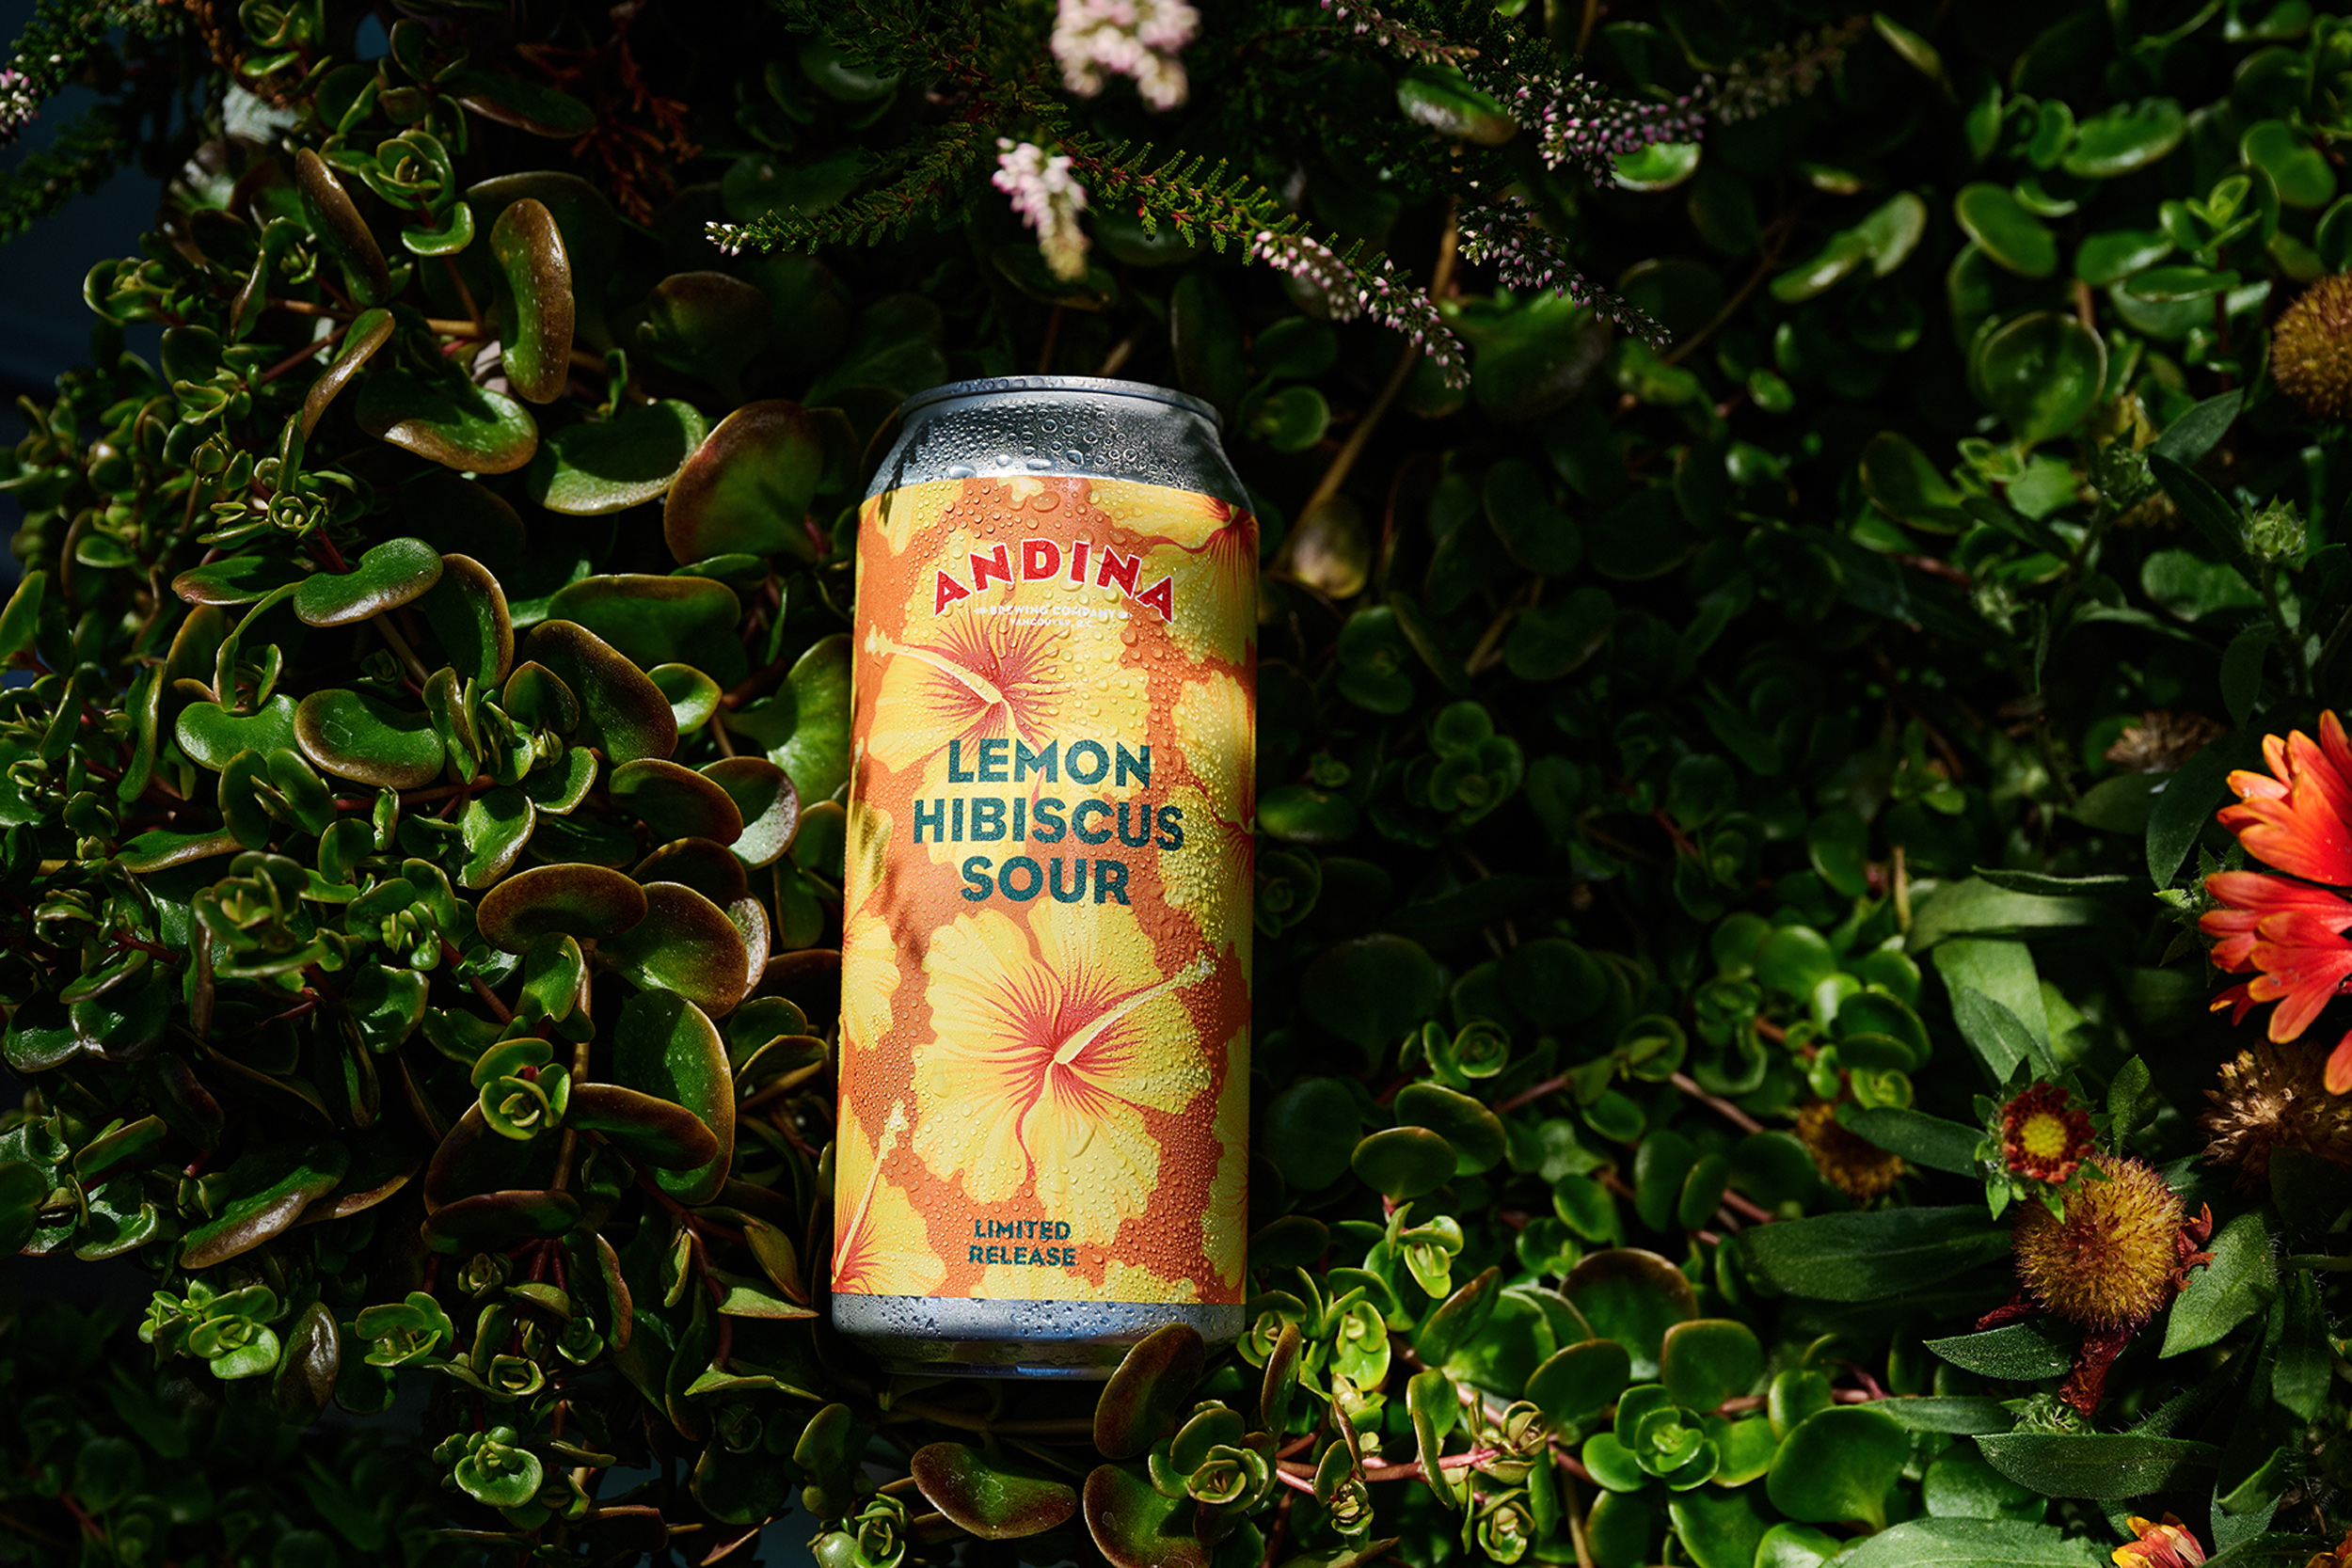 2022-Vancouver-Lifestyle-Photographer-ErichSaide-product-AndinaBrewingcompany-LemonHIBISCUSSOUR-0031